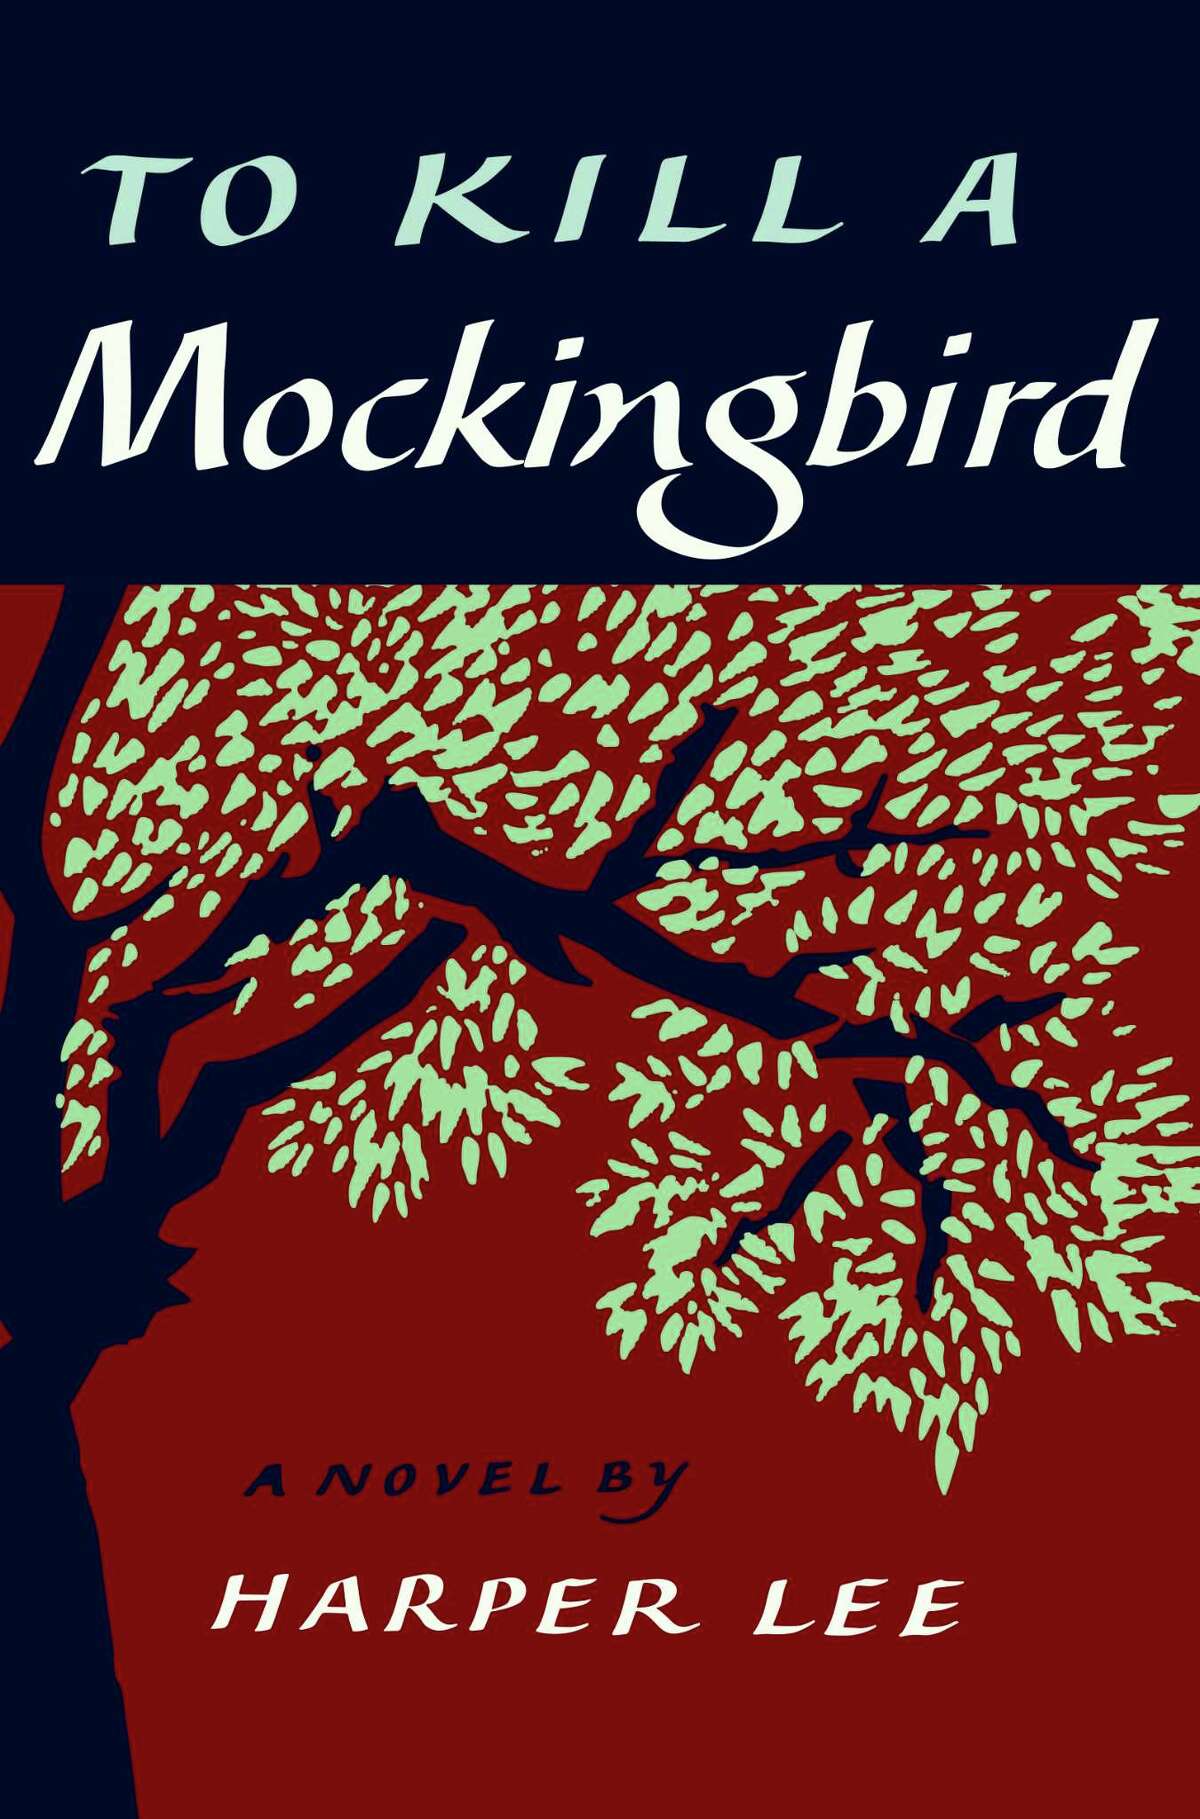 Harper Lee’s “To Kill A Mockingbird” is the One Book on the Riverbend choice for a community-wide reading event.